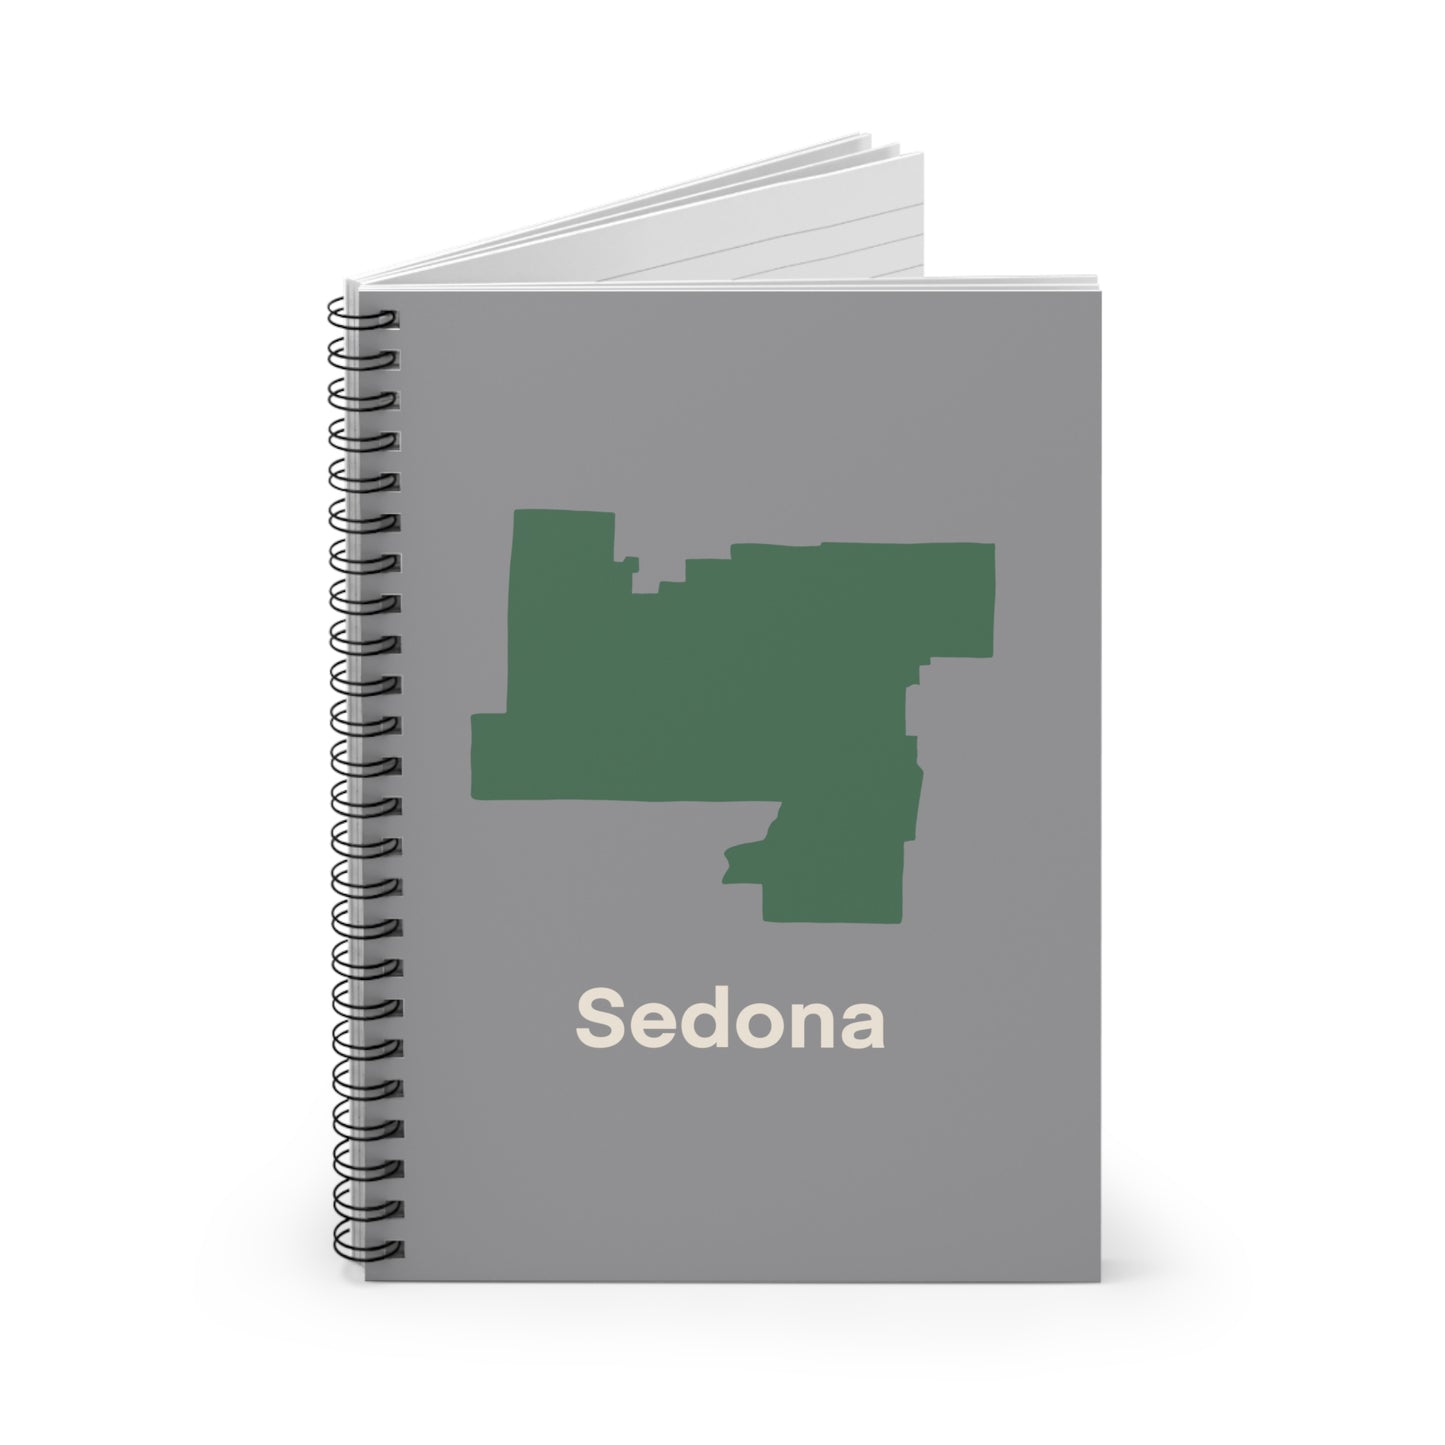 Sedona in Green Spiral Notebook - Ruled Line